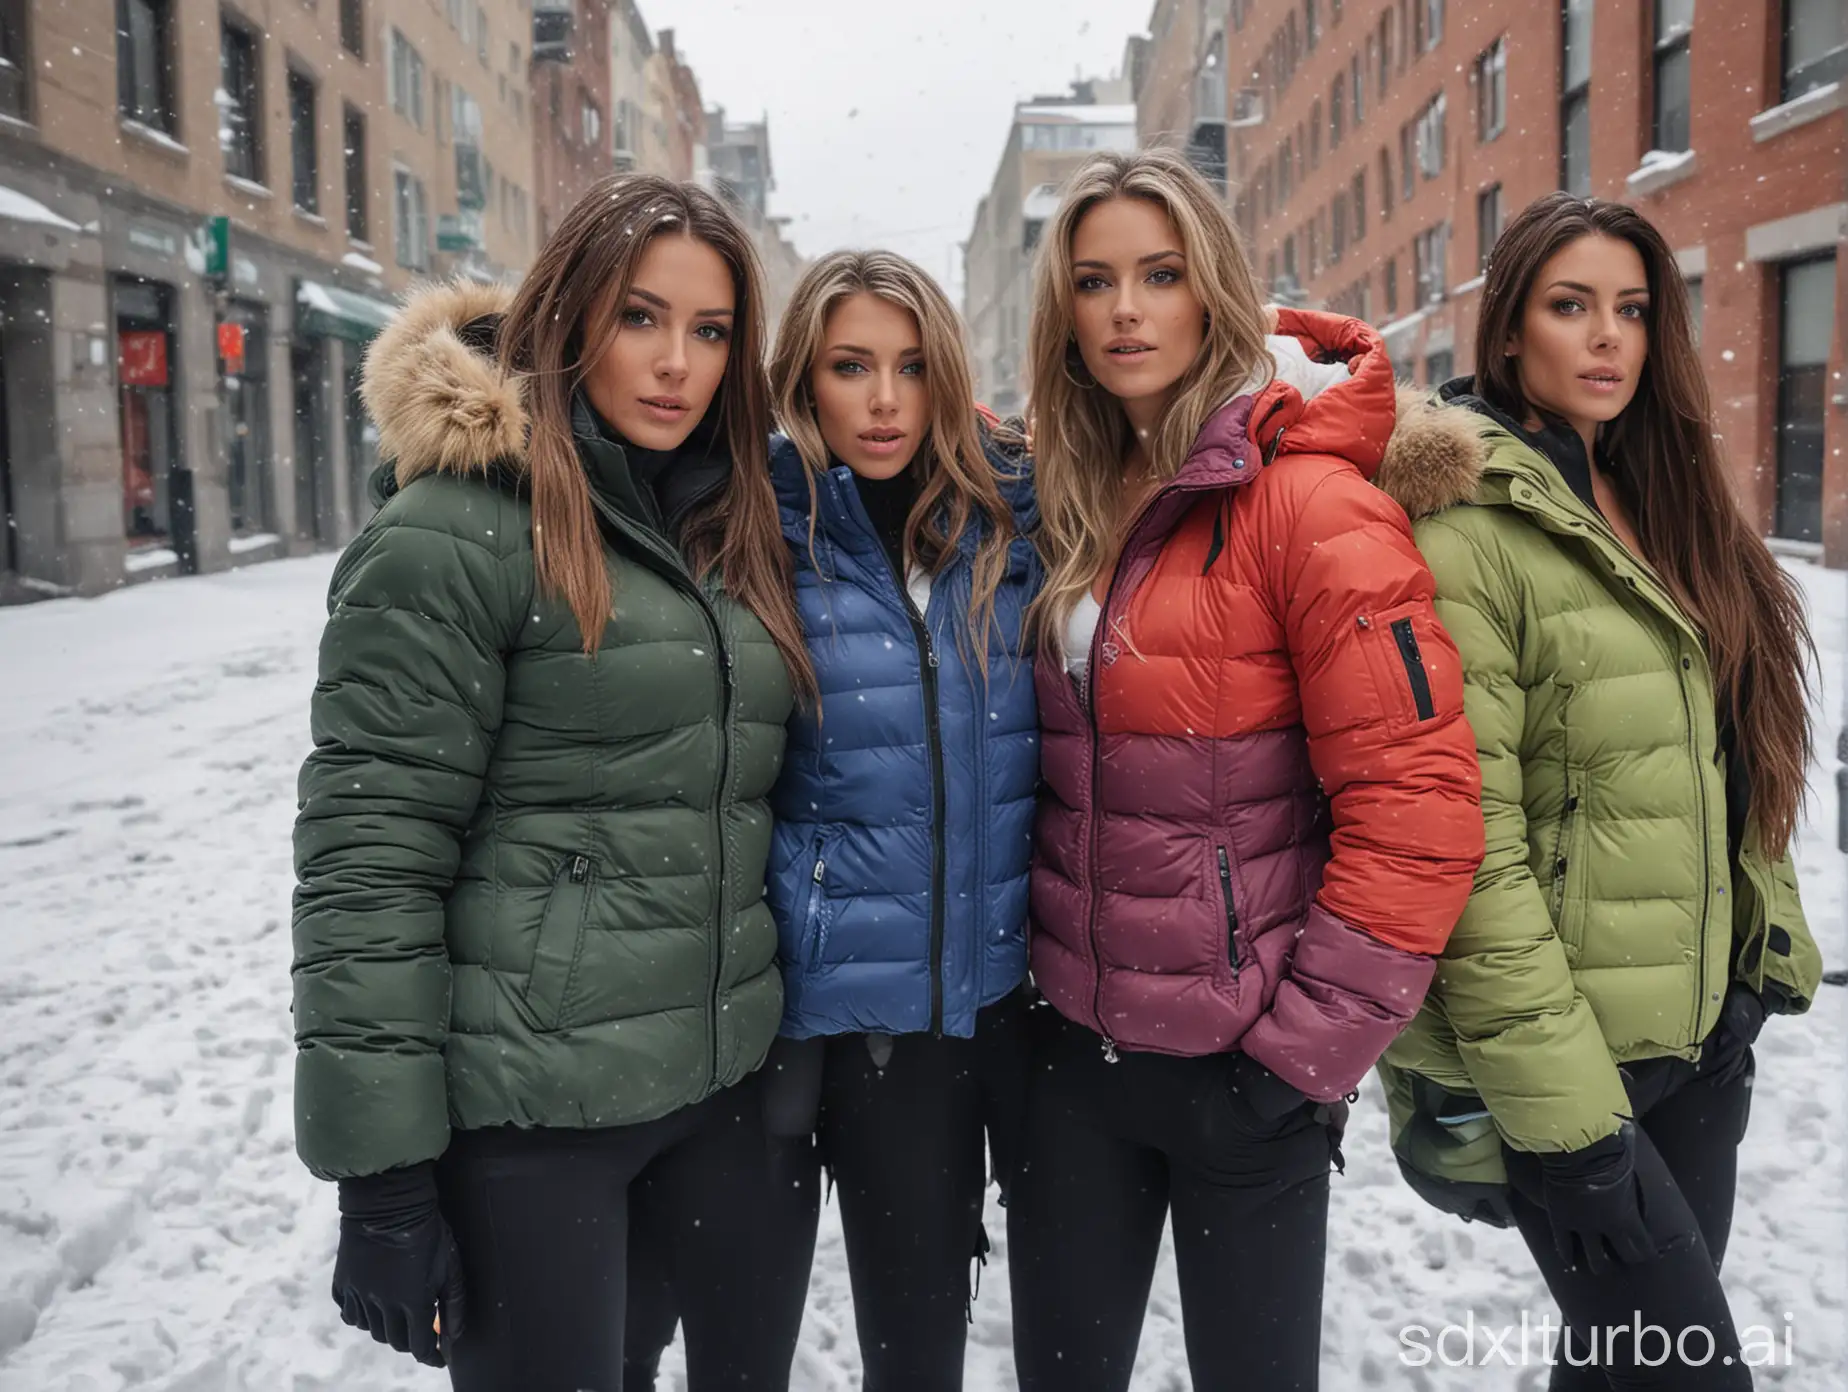 3 sexy muscular women in various colored thick down jackets in snow in a city